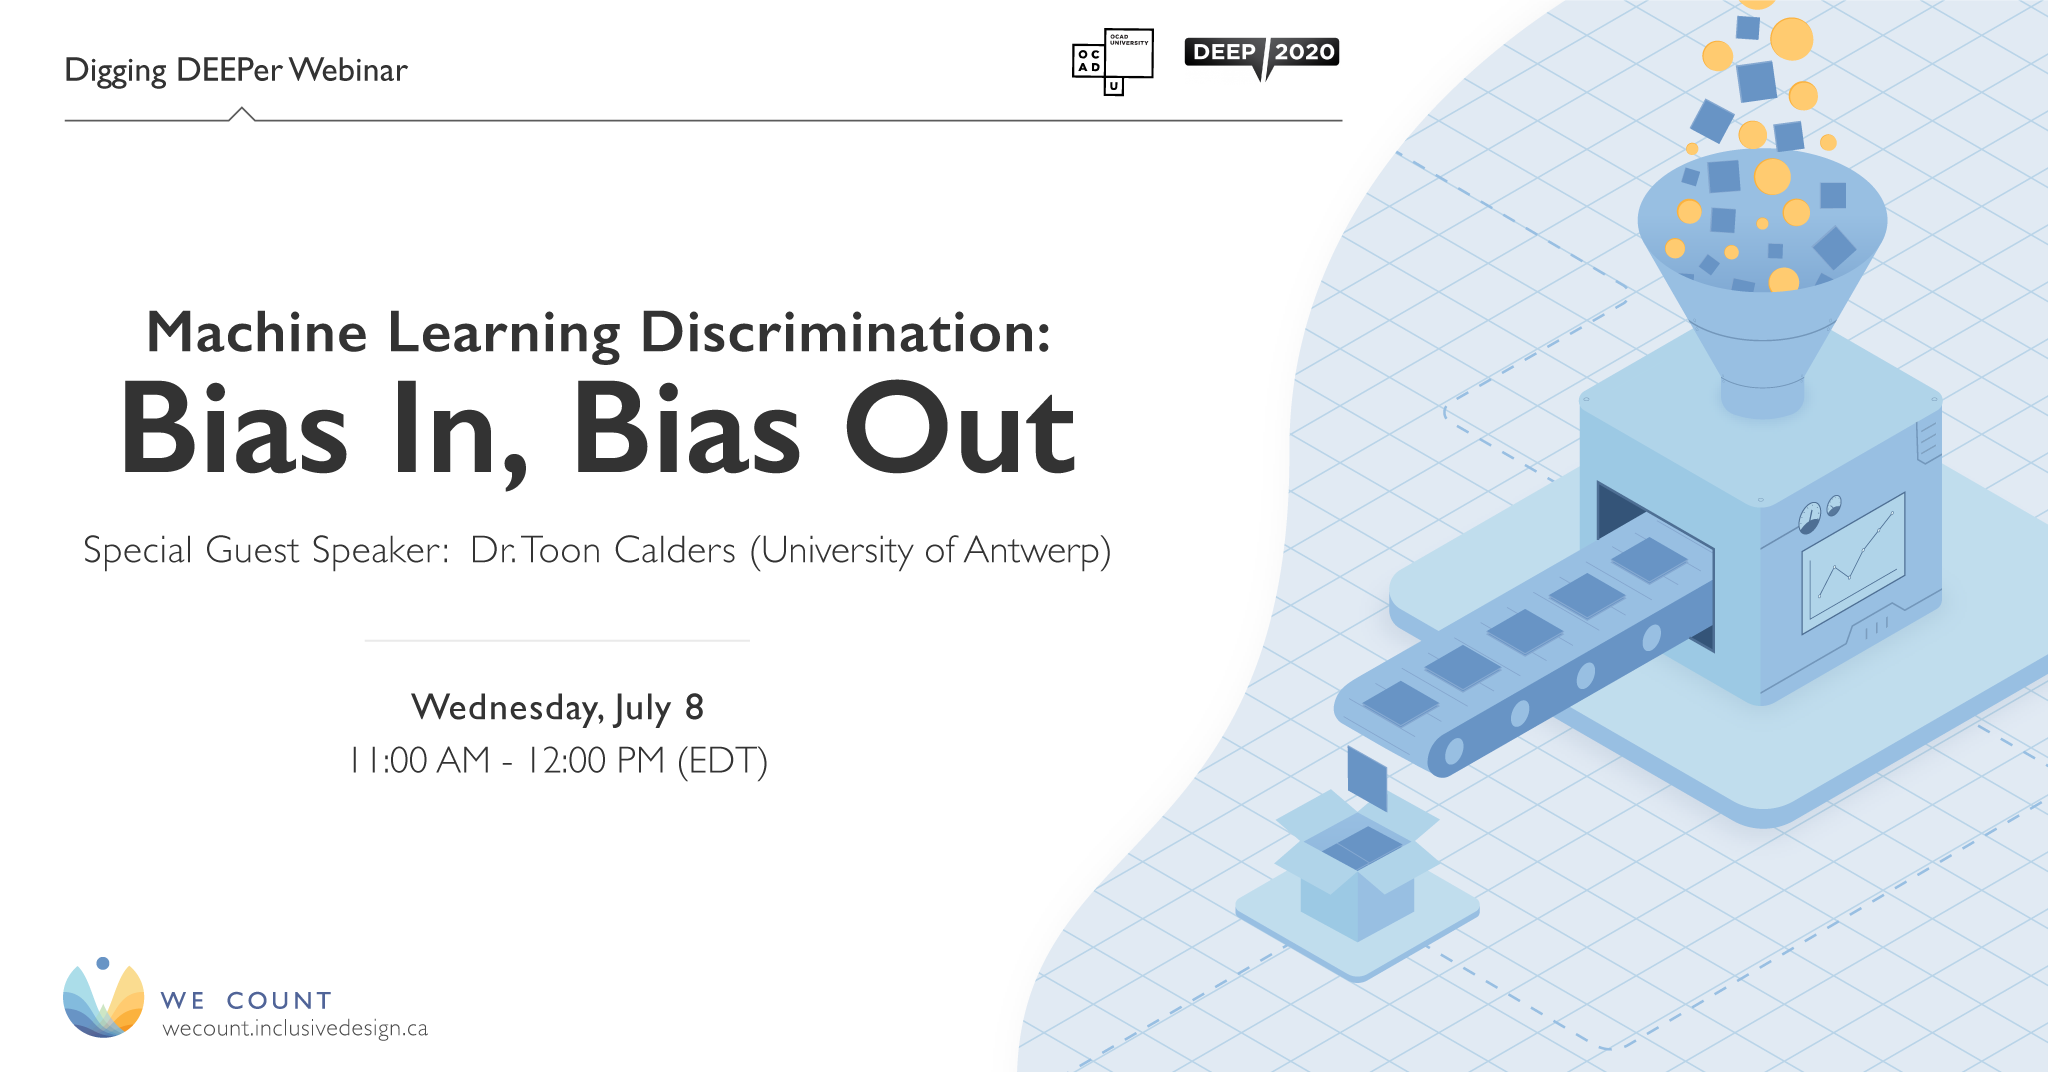 Digging DEEPer Webinar on Machine Learning Discrimination by Dr. Toon Calders on July 8, 2020, 11AM-12PM